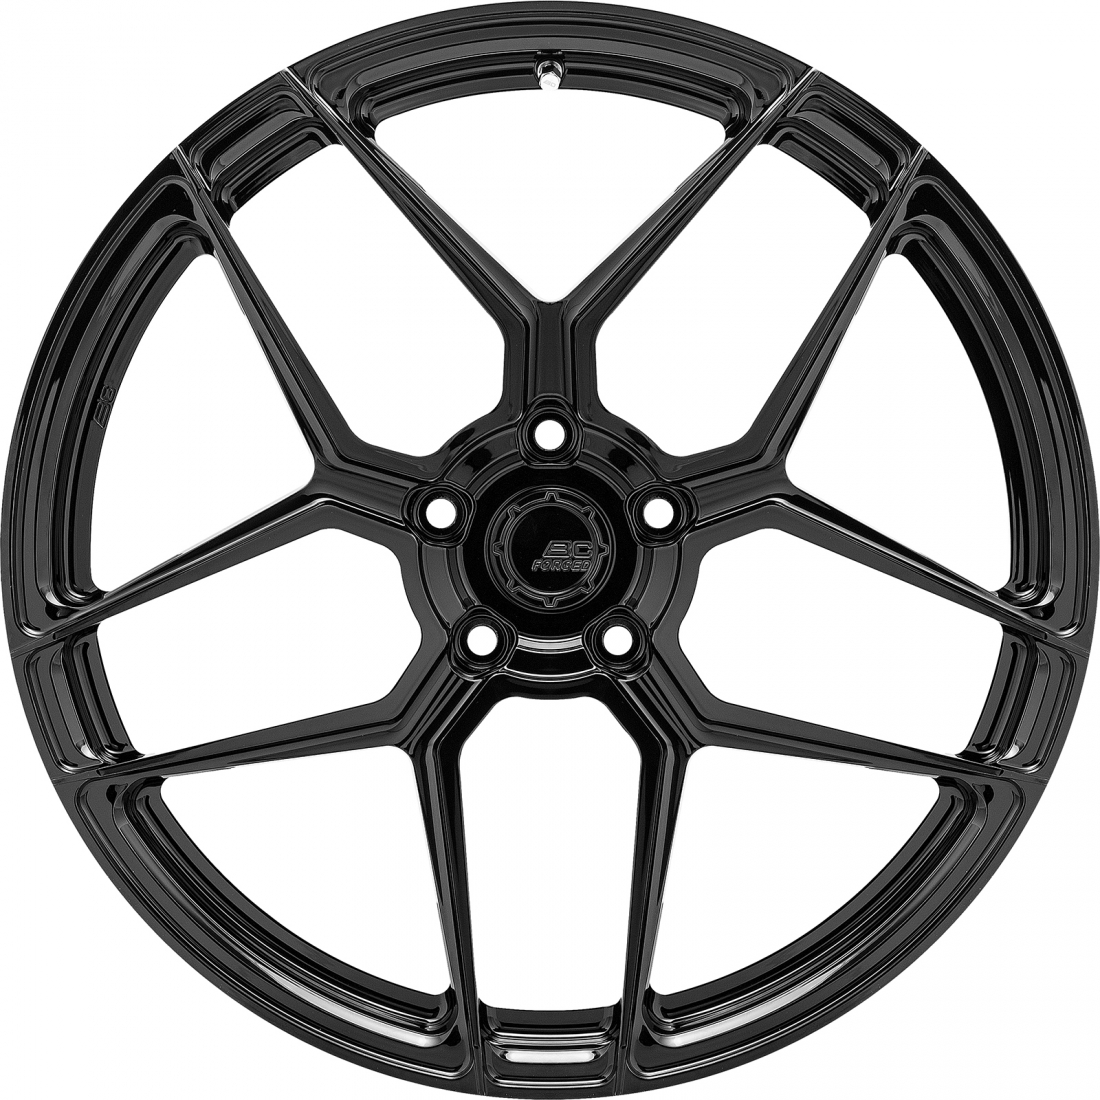 2020-23 BC Forged EH309 Wheels for C8 Corvette, Set of 4